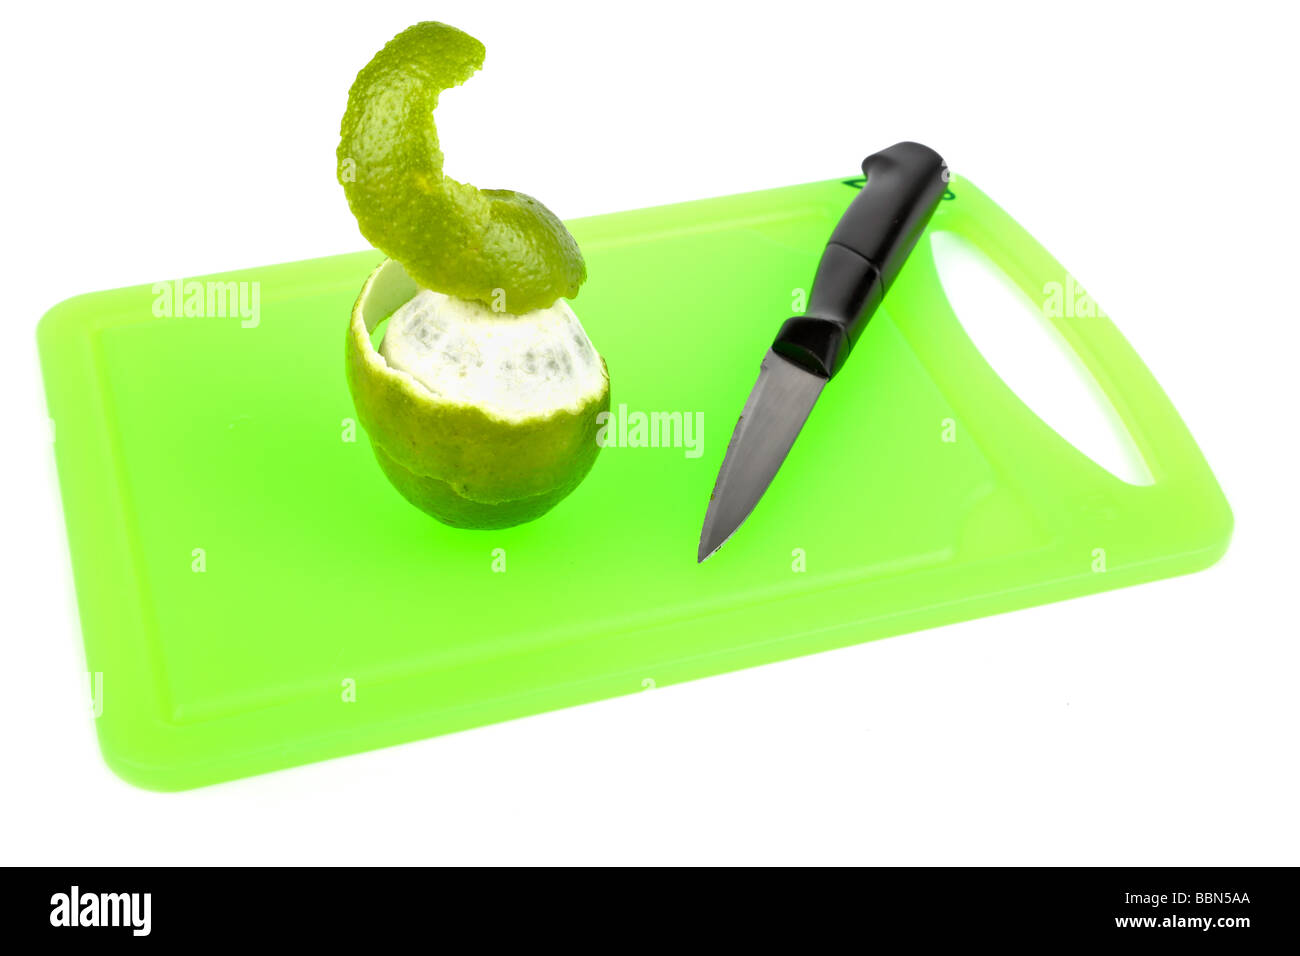 Lime being peeled with a knife on a cutting board Stock Photo